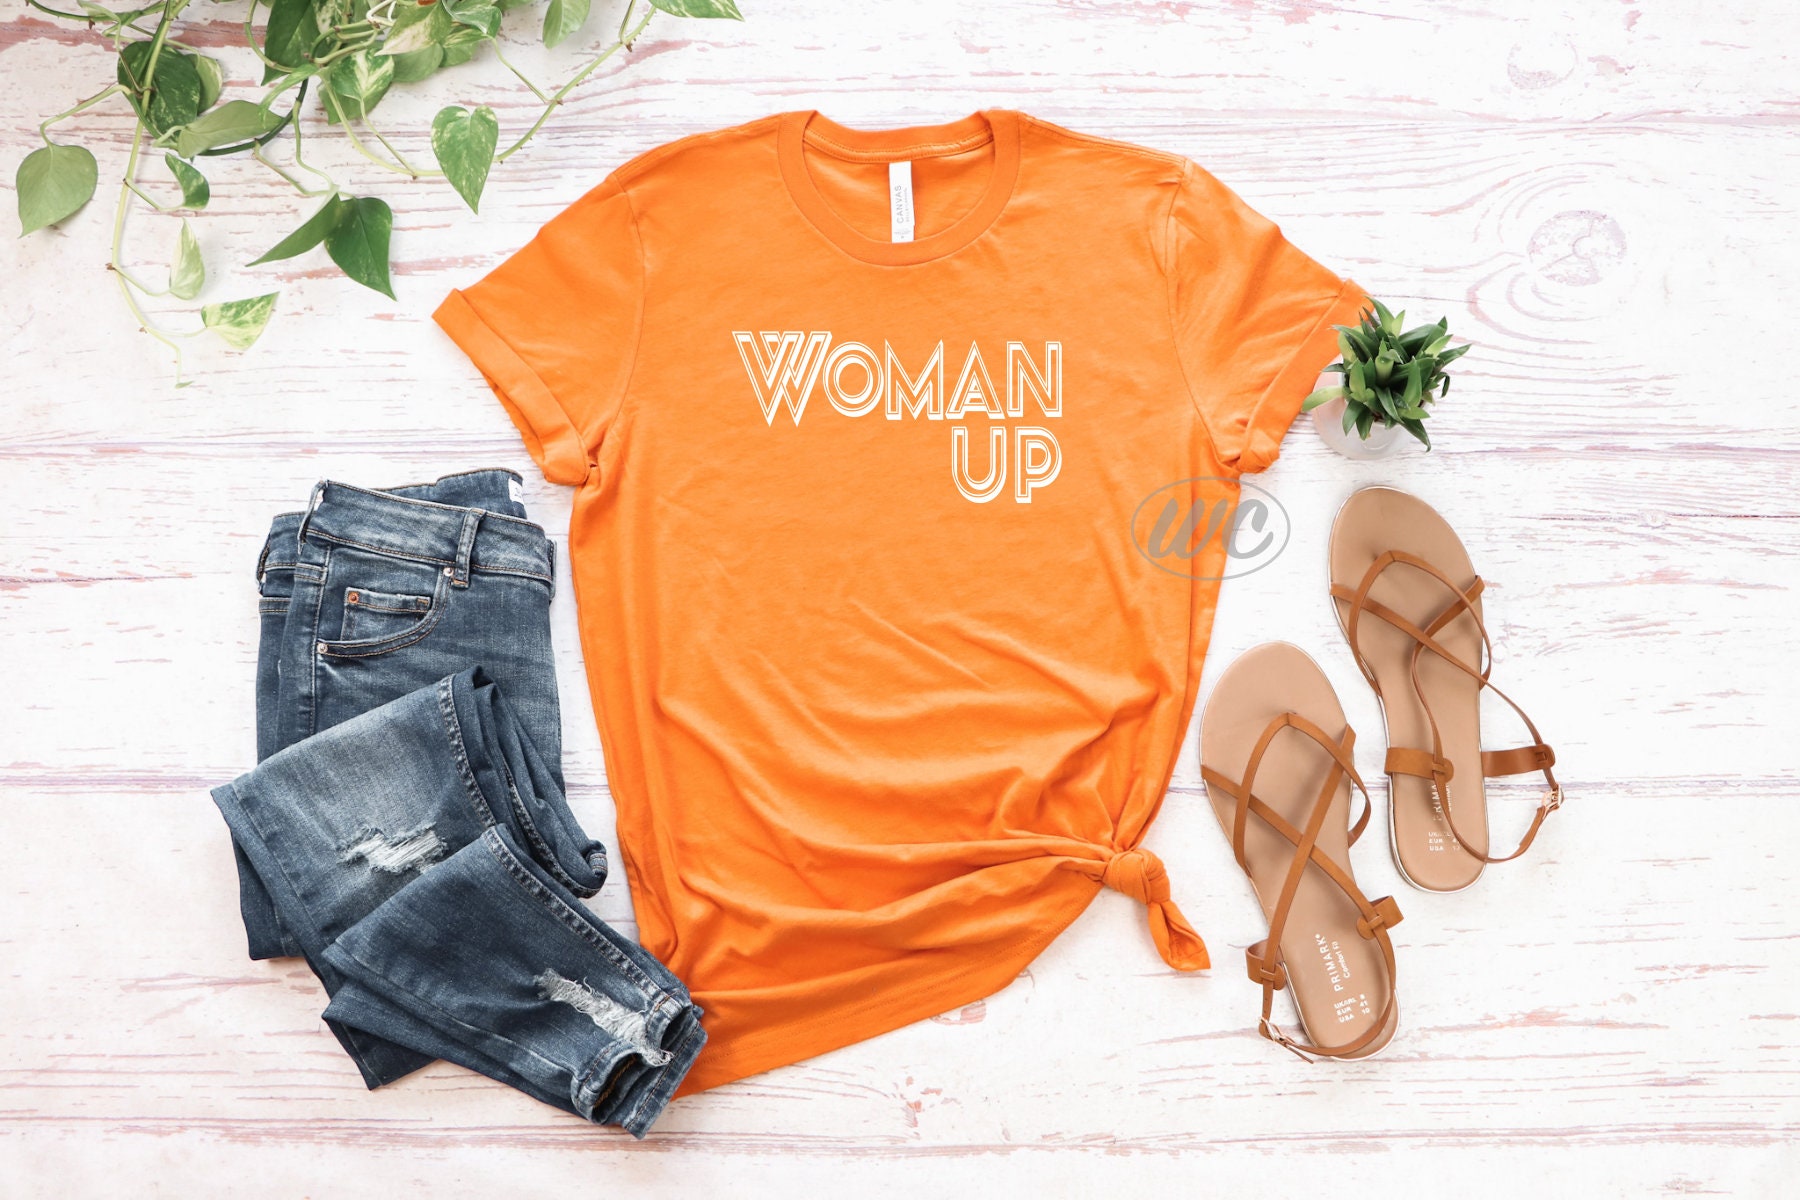 Discover WOMAN UP T-shirt | Shirts for Women | Cute shirts for her | International Women's Day | Mother's Day gift | Empowerment tees | Gifts for mom